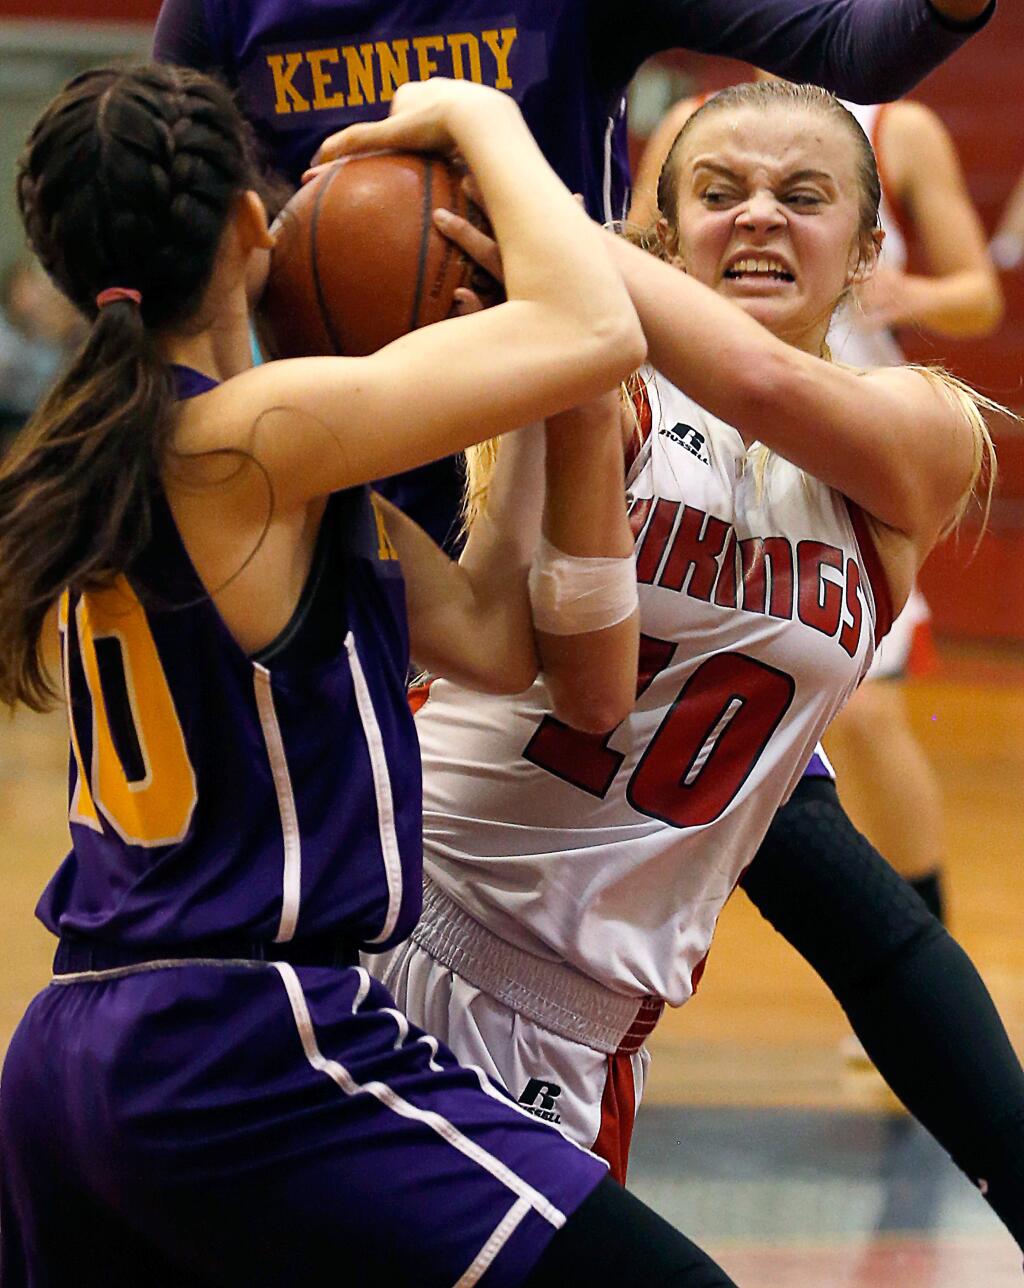 Montgomery's Shayla Newman (10), right, wrestles Kennedy's Raylene Hawkins (10) for ball possession during the first half of the NCS Division 2 girls basketball first round playoff game between Kennedy and Montgomery high schools in Santa Rosa, California on Tuesday, February 21, 2017. (Alvin Jornada / The Press Democrat)